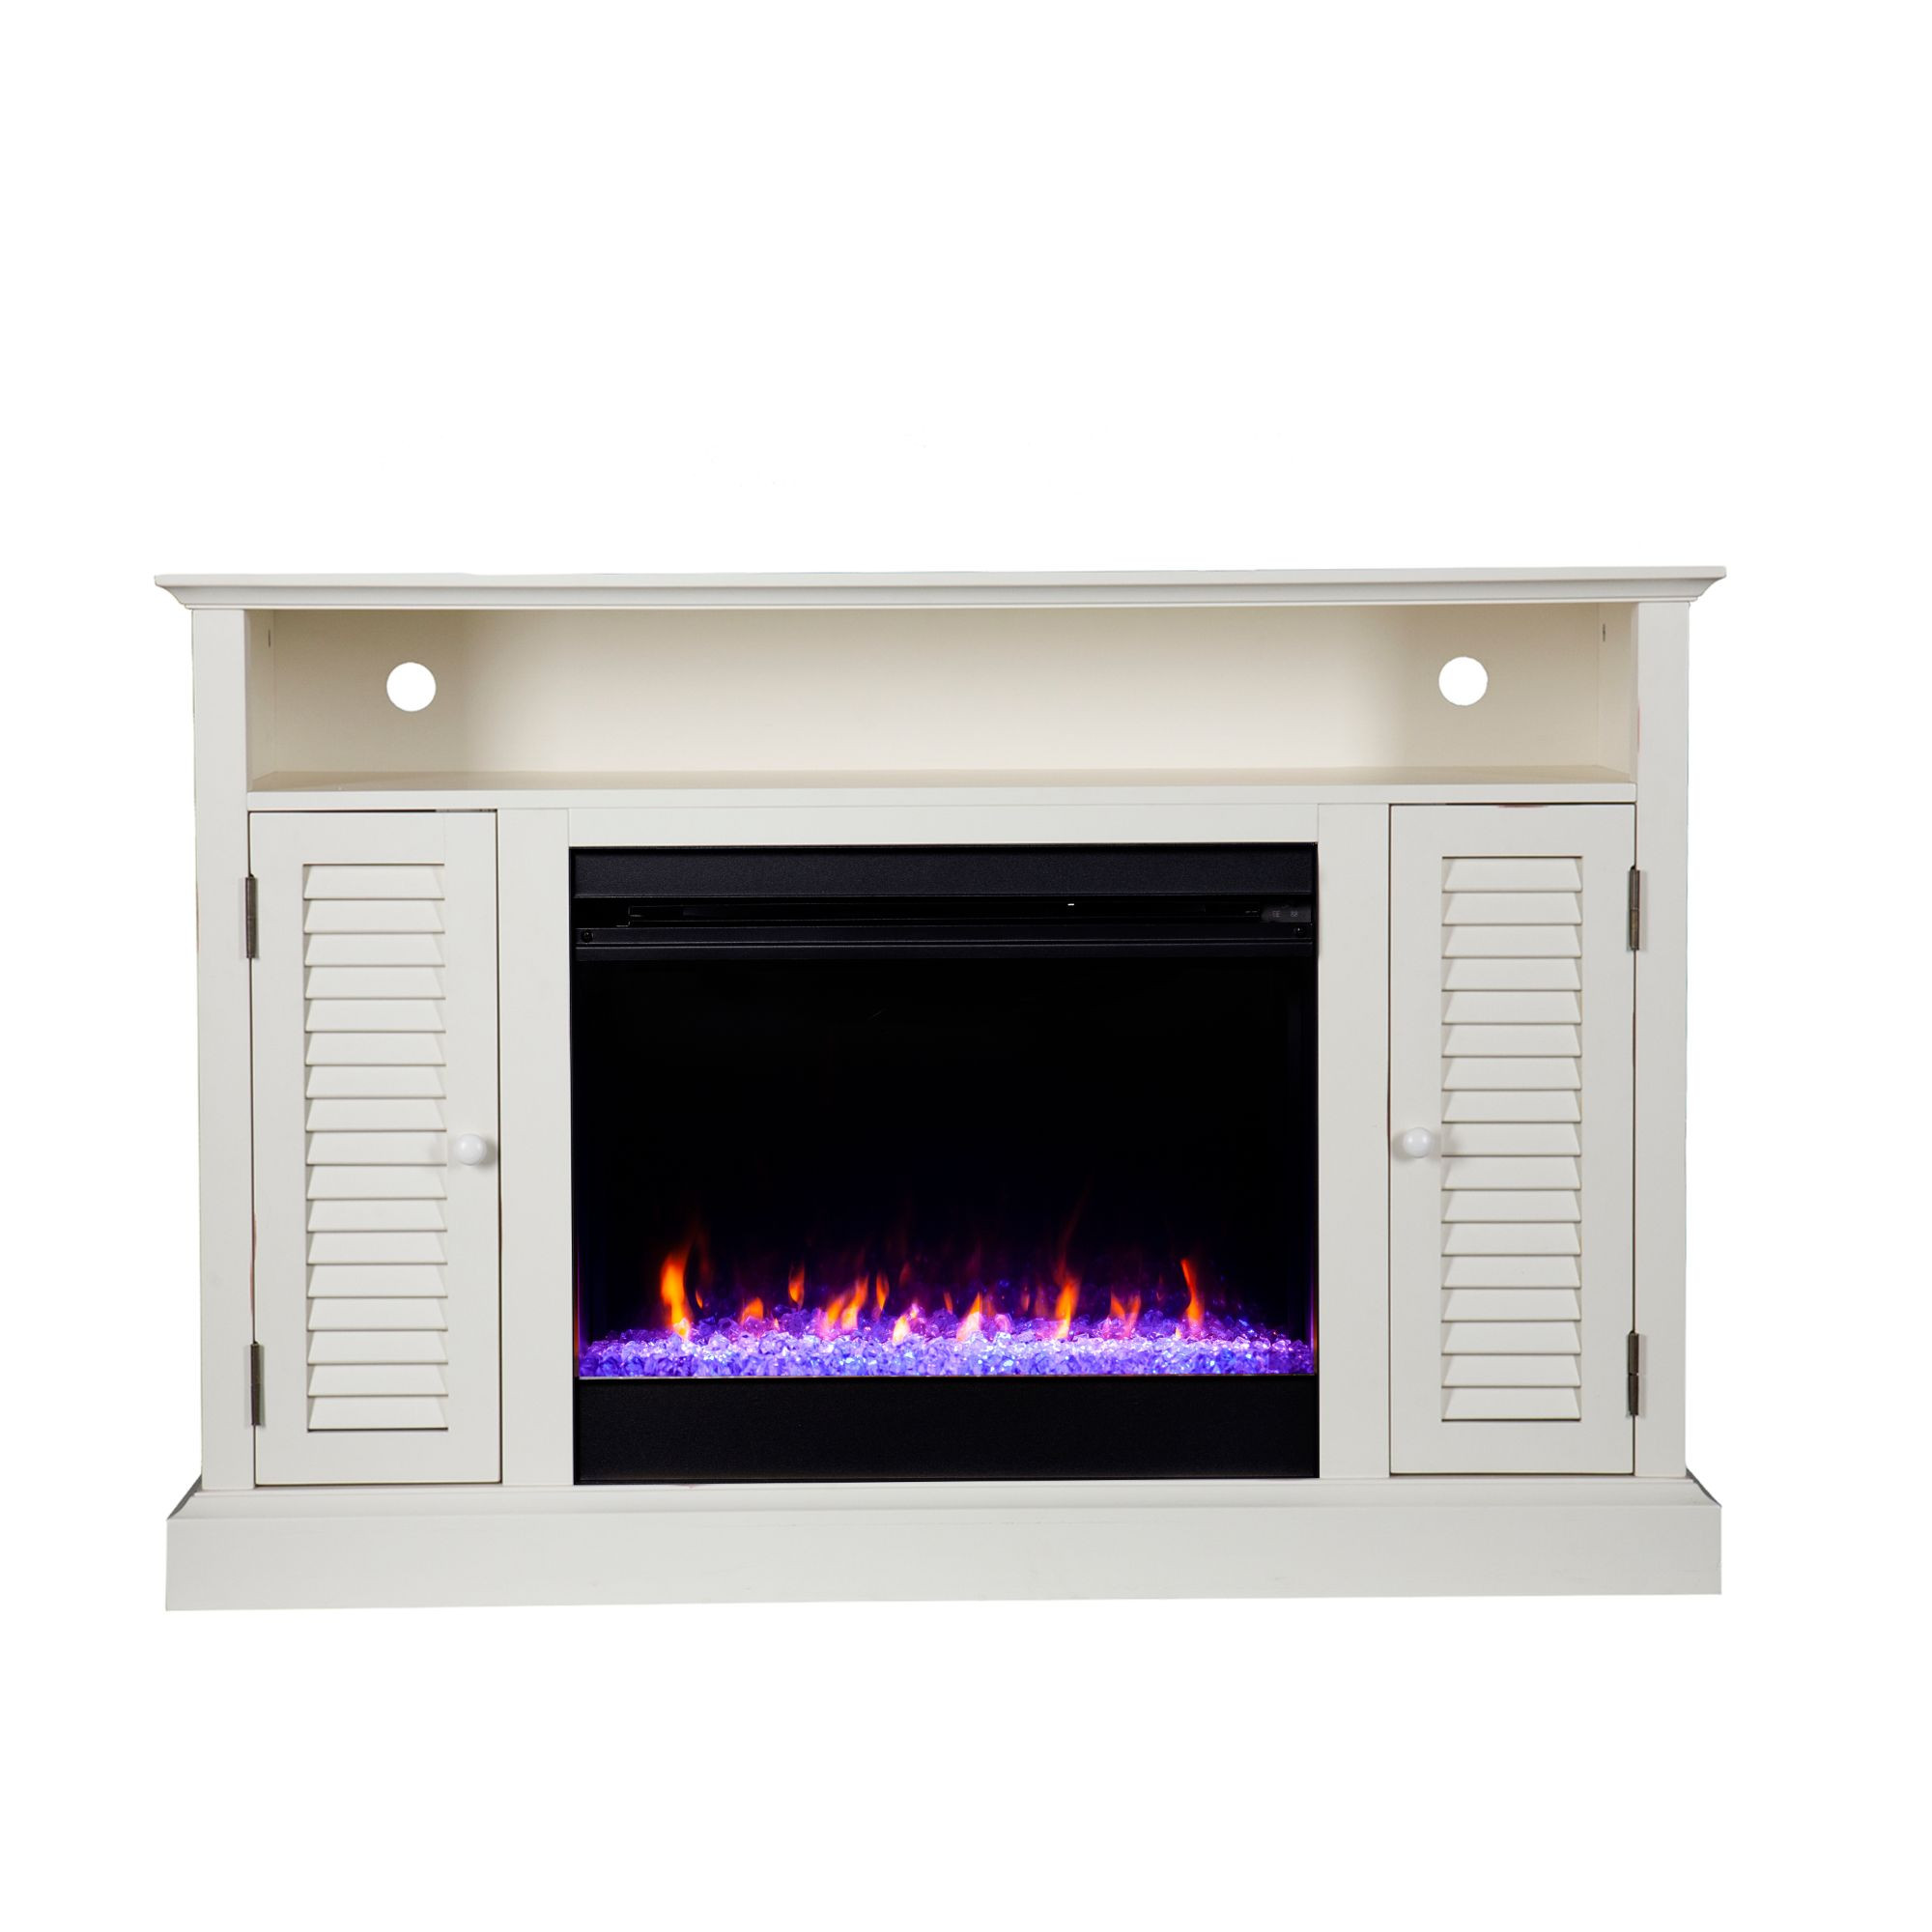 Distressed Electric Fireplace
 48" White Distressed Finish Electric Fireplace with